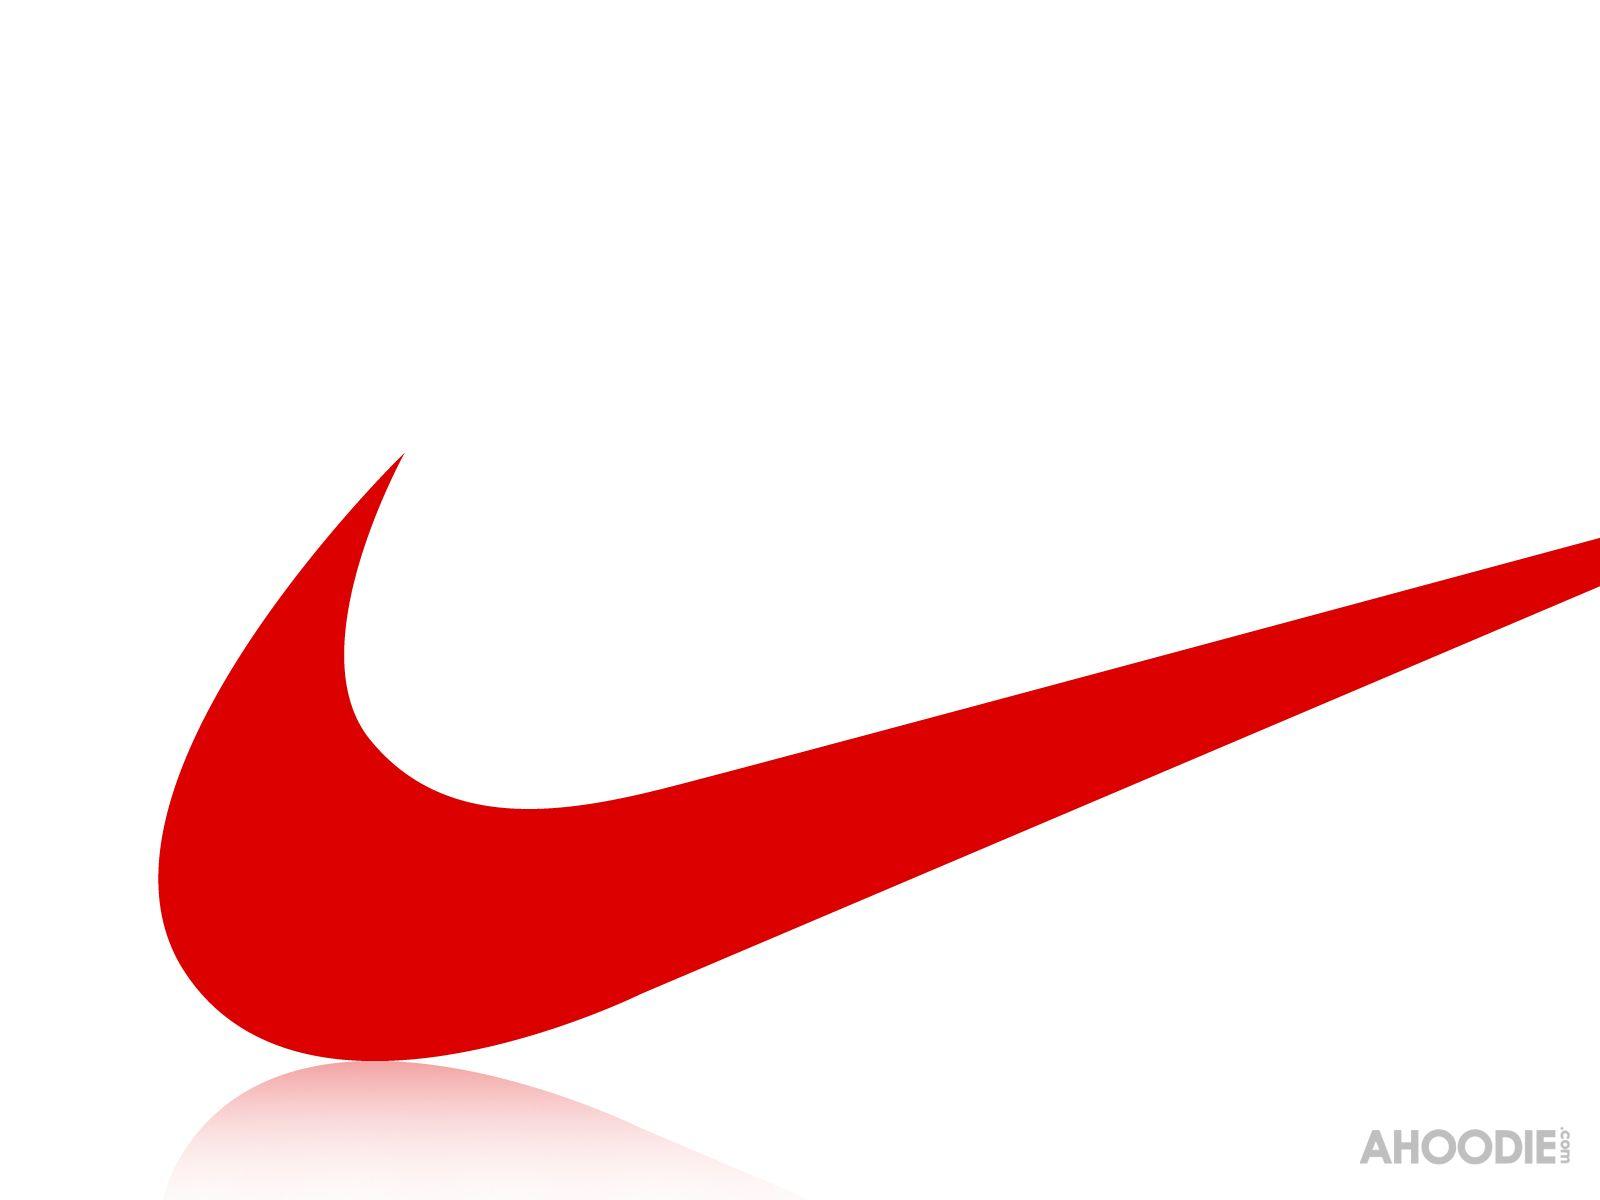 red nike icon